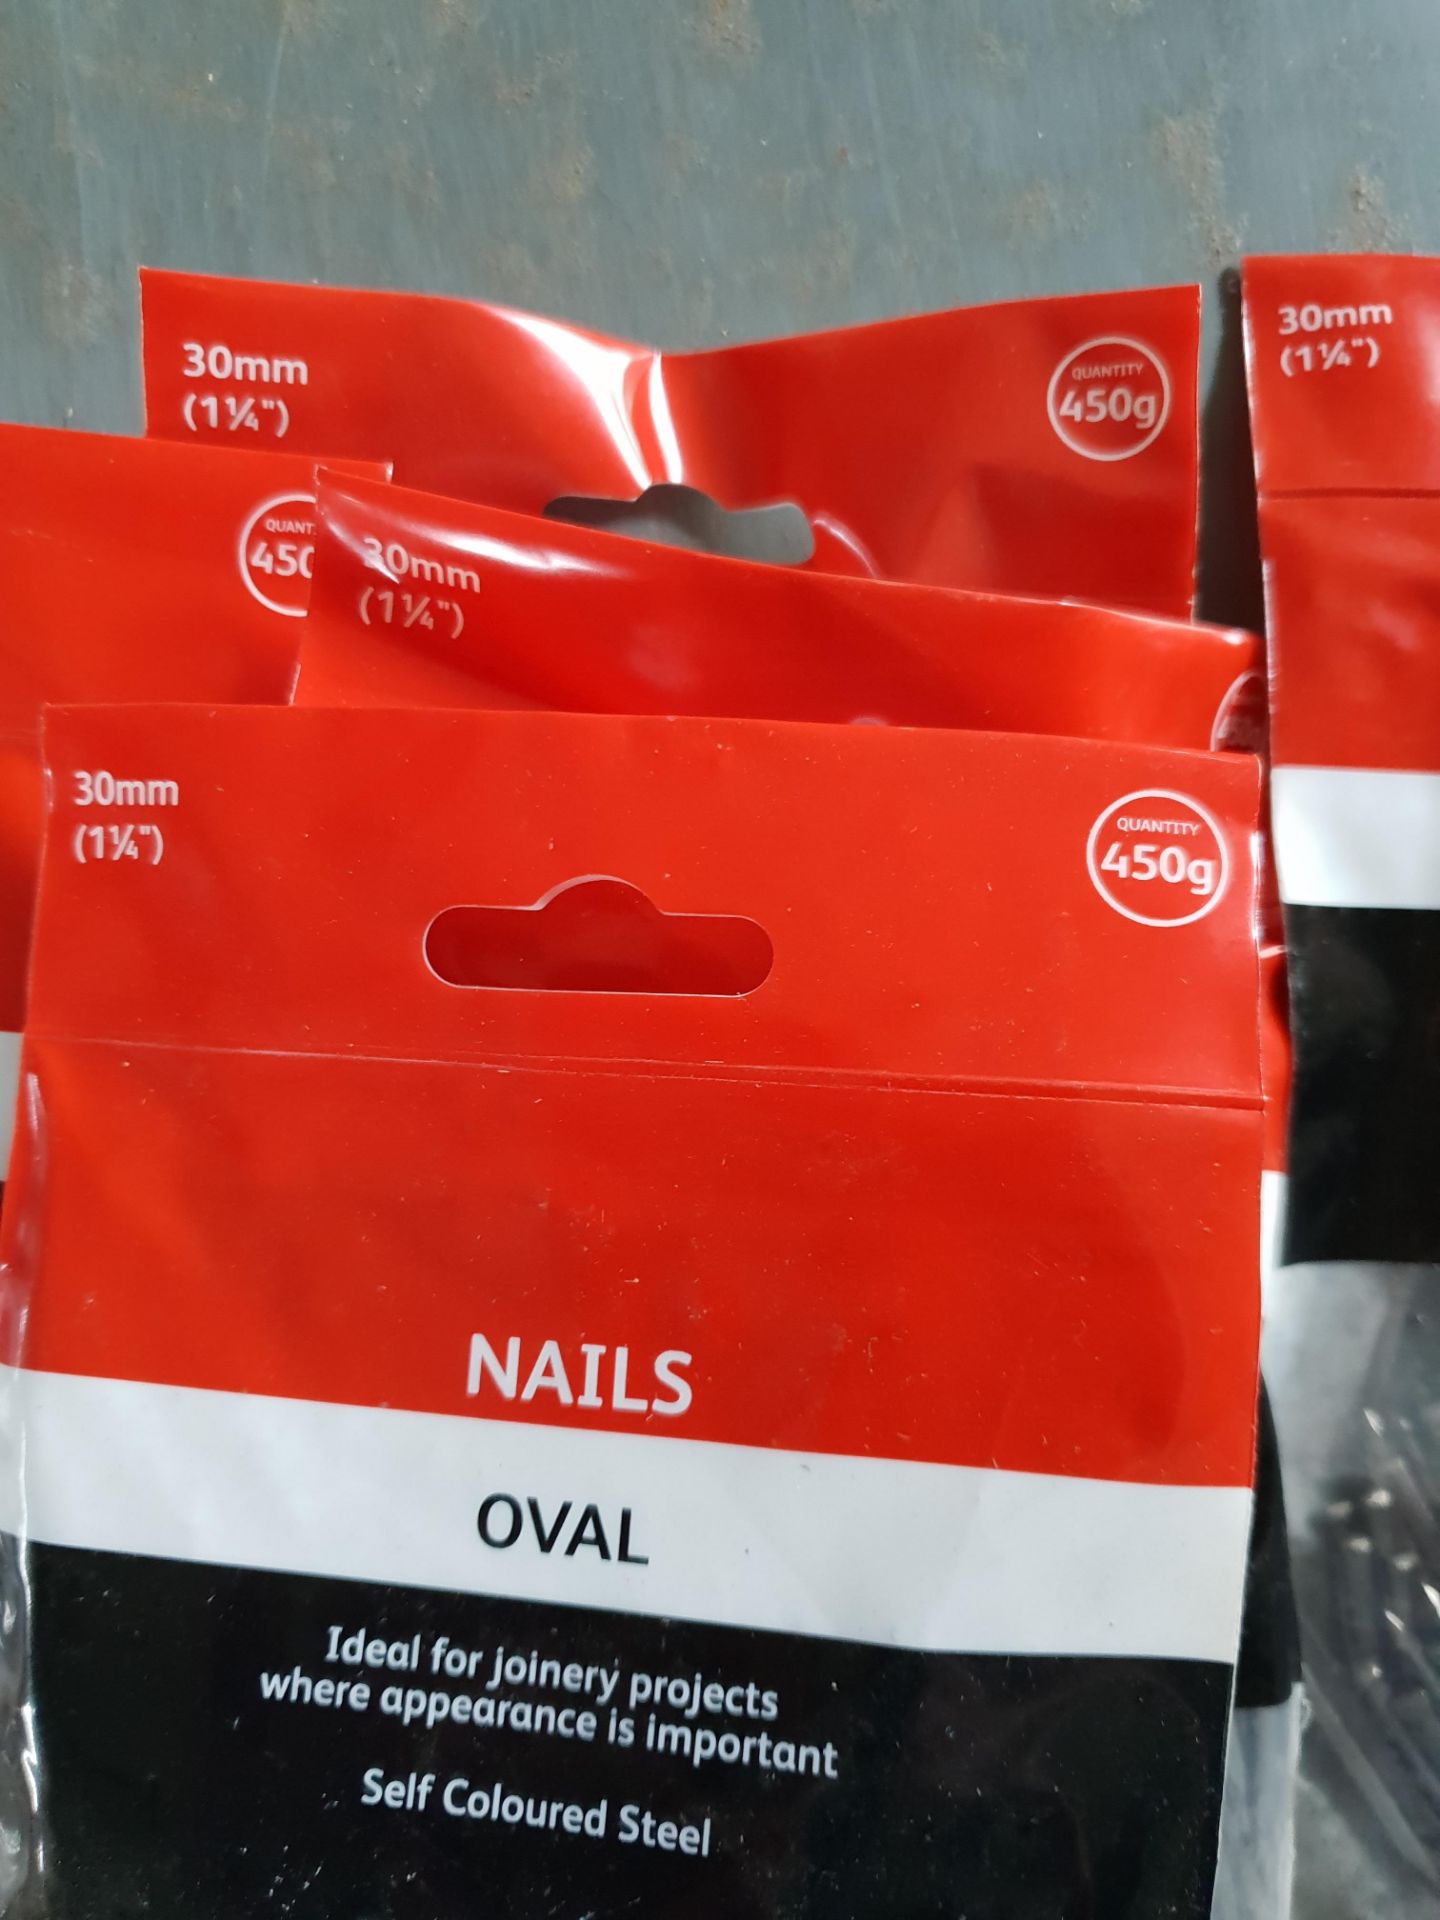 20 packs - 30mm oval nails - Image 2 of 2